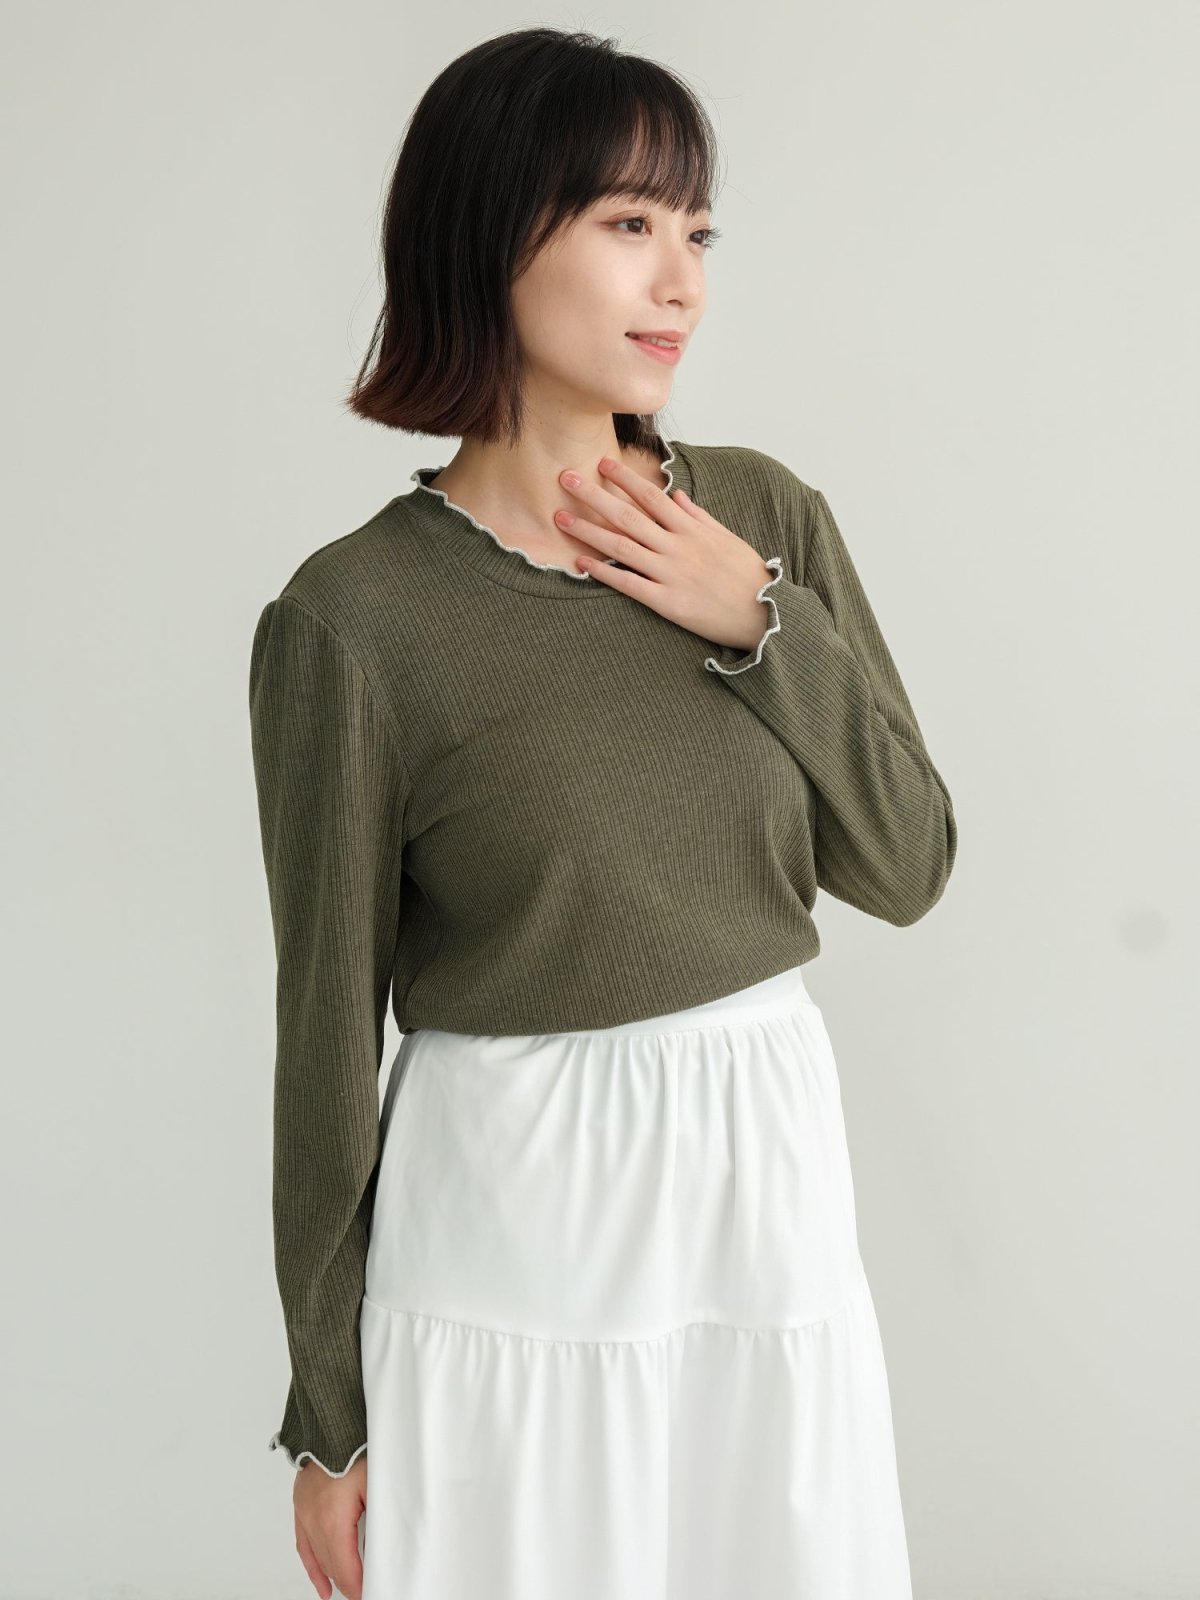 Loas Ruffle Ribbed Top - DAG-DD1093-23OliveGreenS - Olive Green - S - D'zage Designs